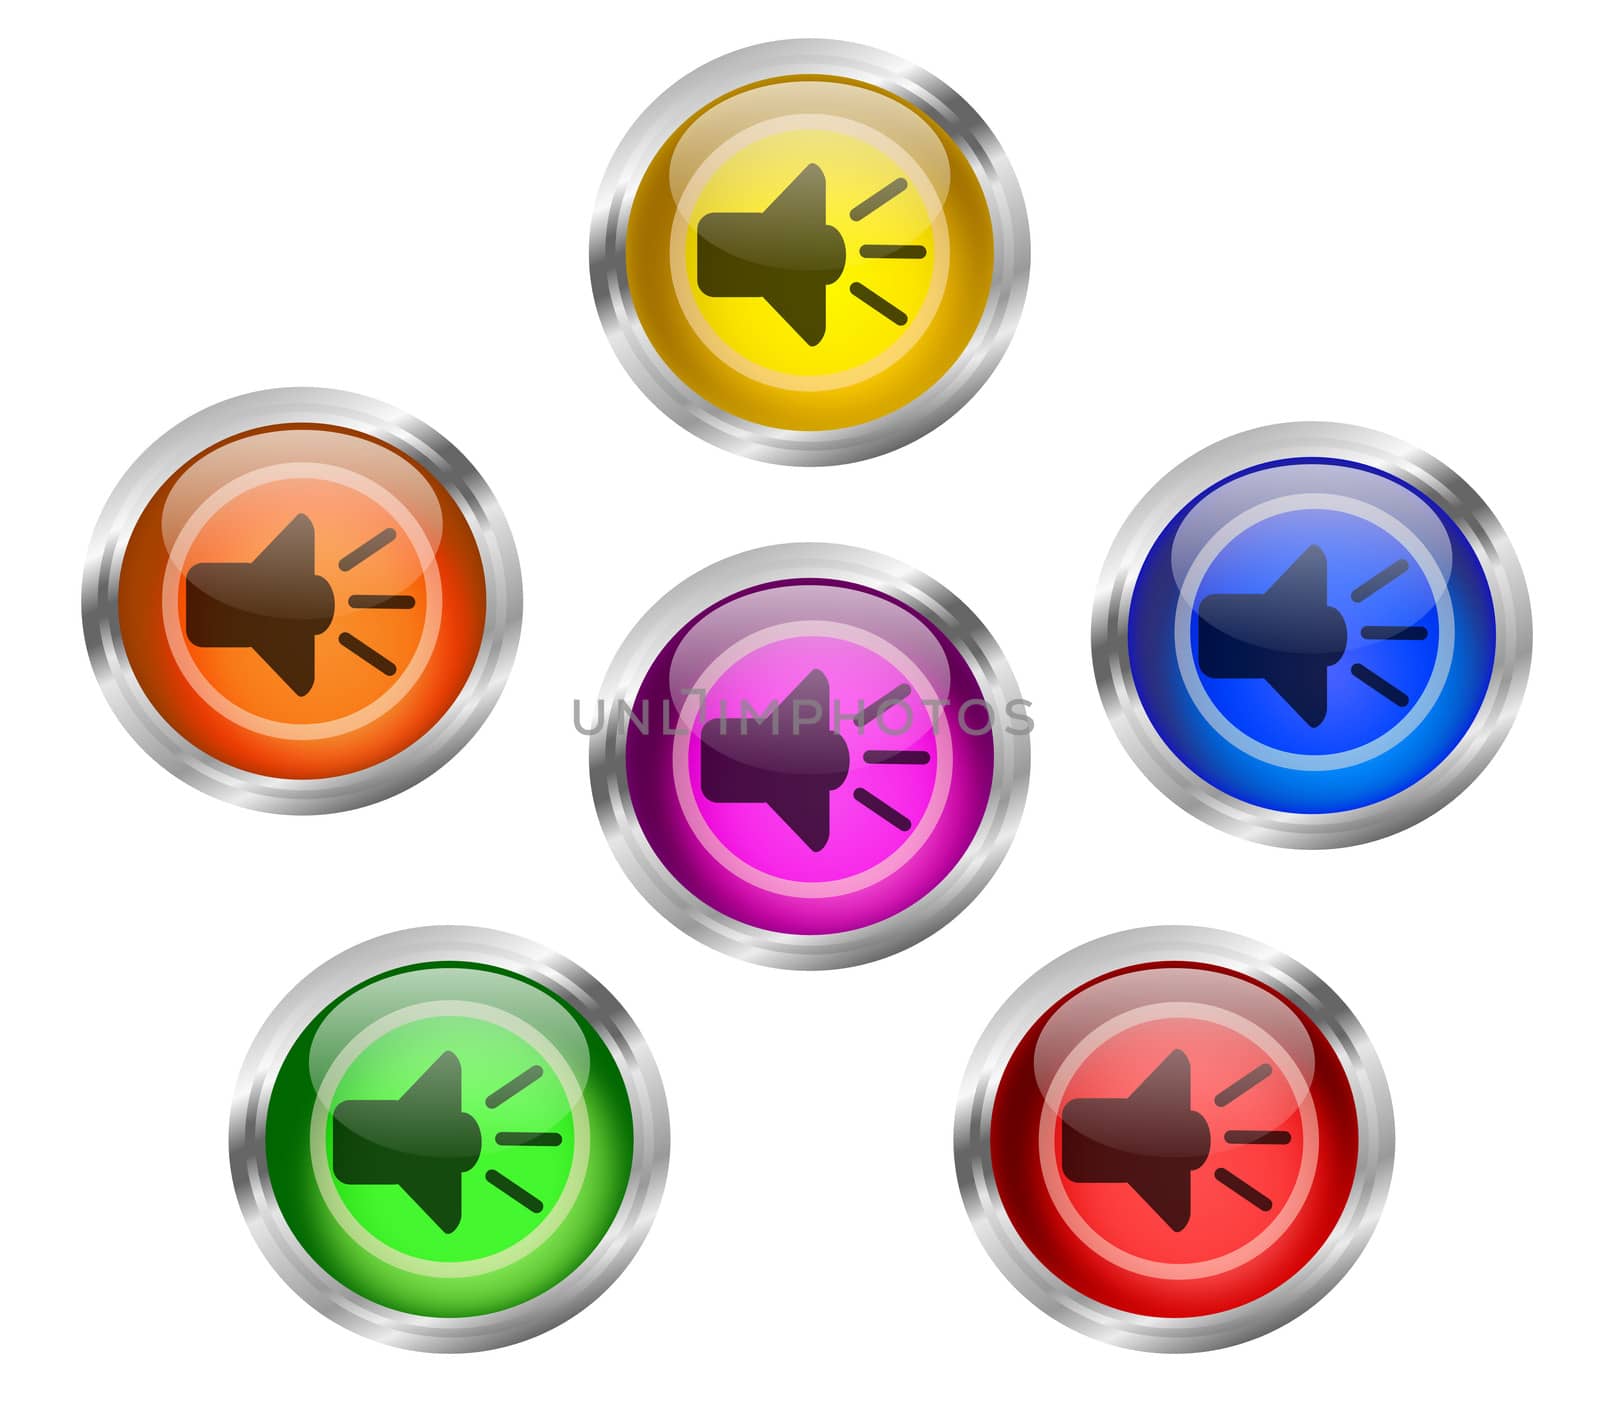 Speaker Audio Music Icon Buttons by RichieThakur